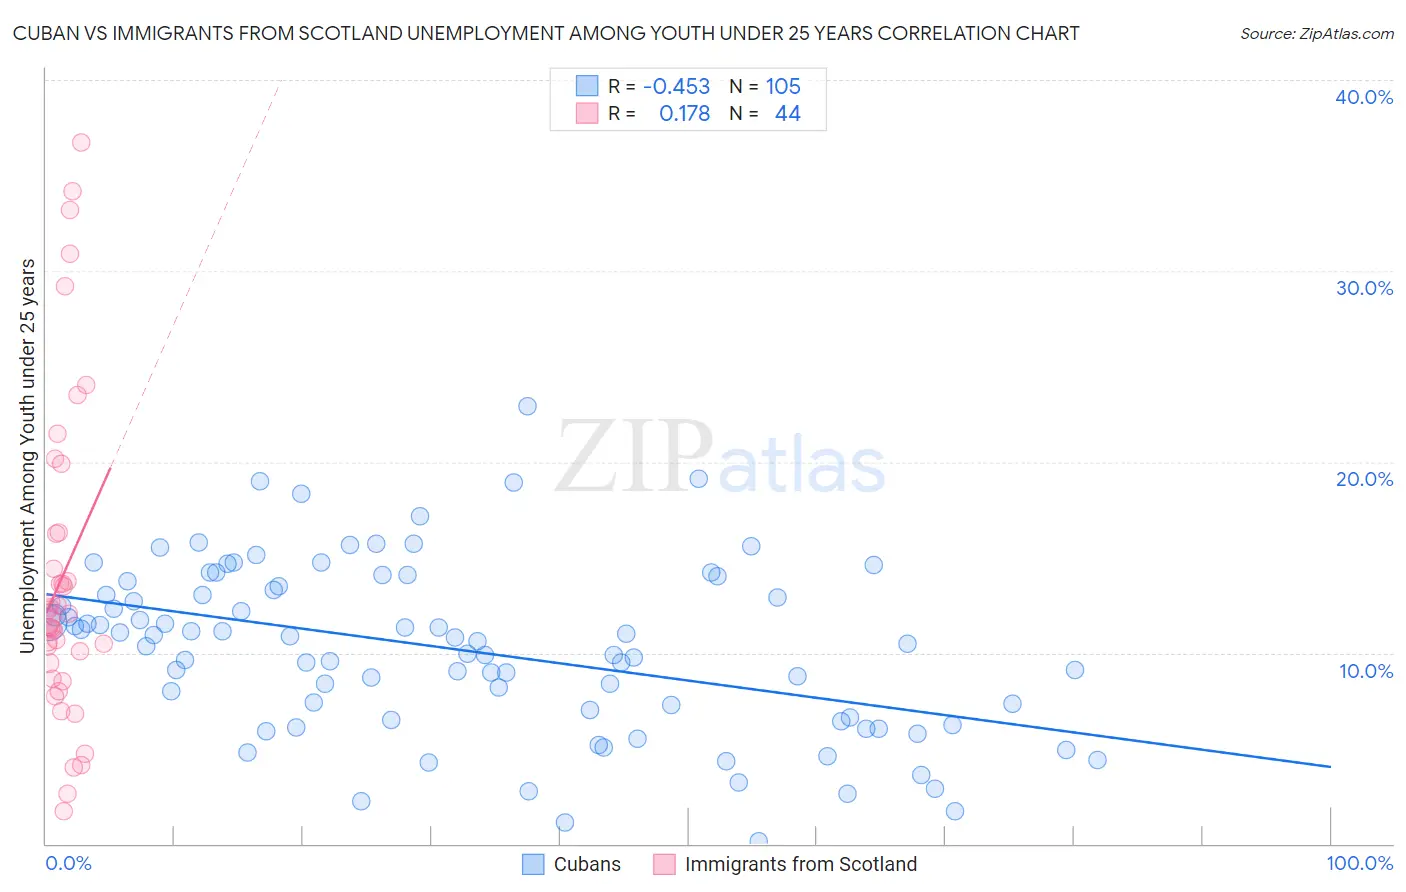 Cuban vs Immigrants from Scotland Unemployment Among Youth under 25 years